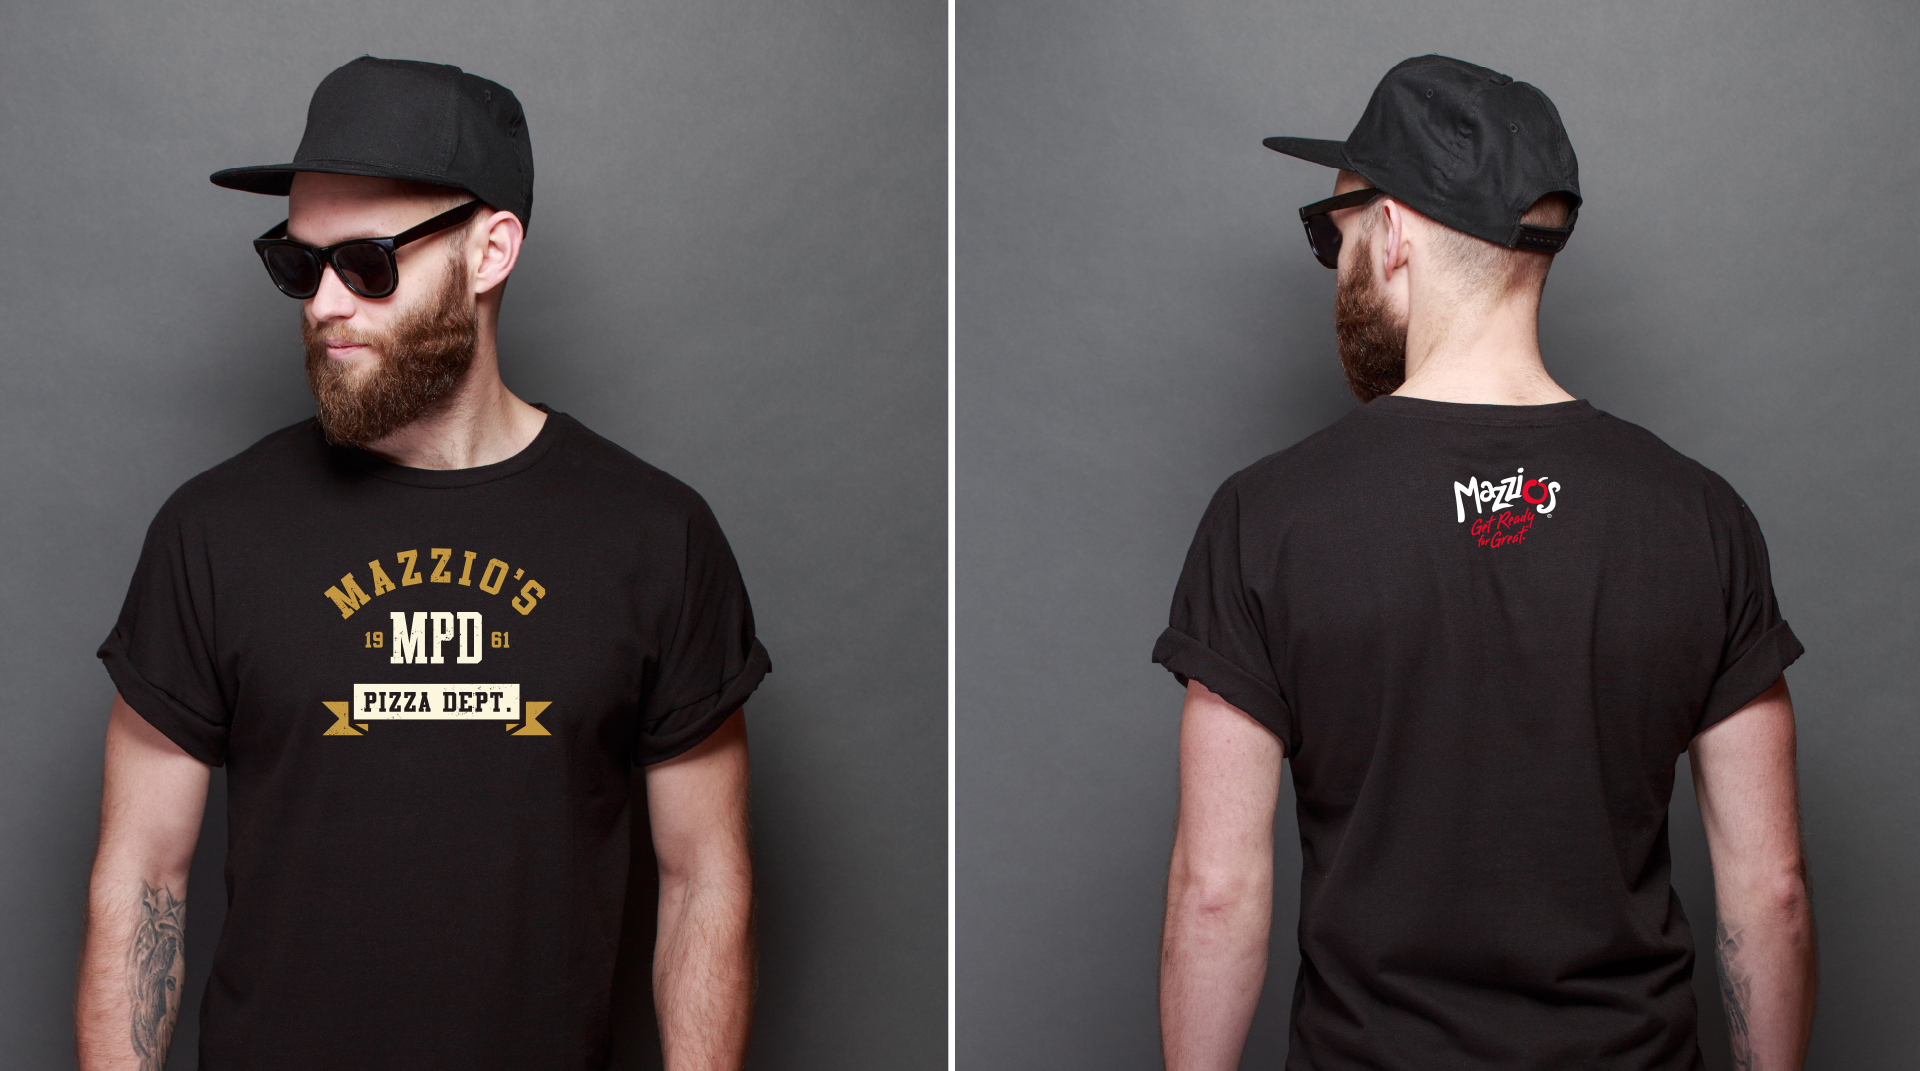 Branded apparel for Mazzio's designed by AcrobatAnt.